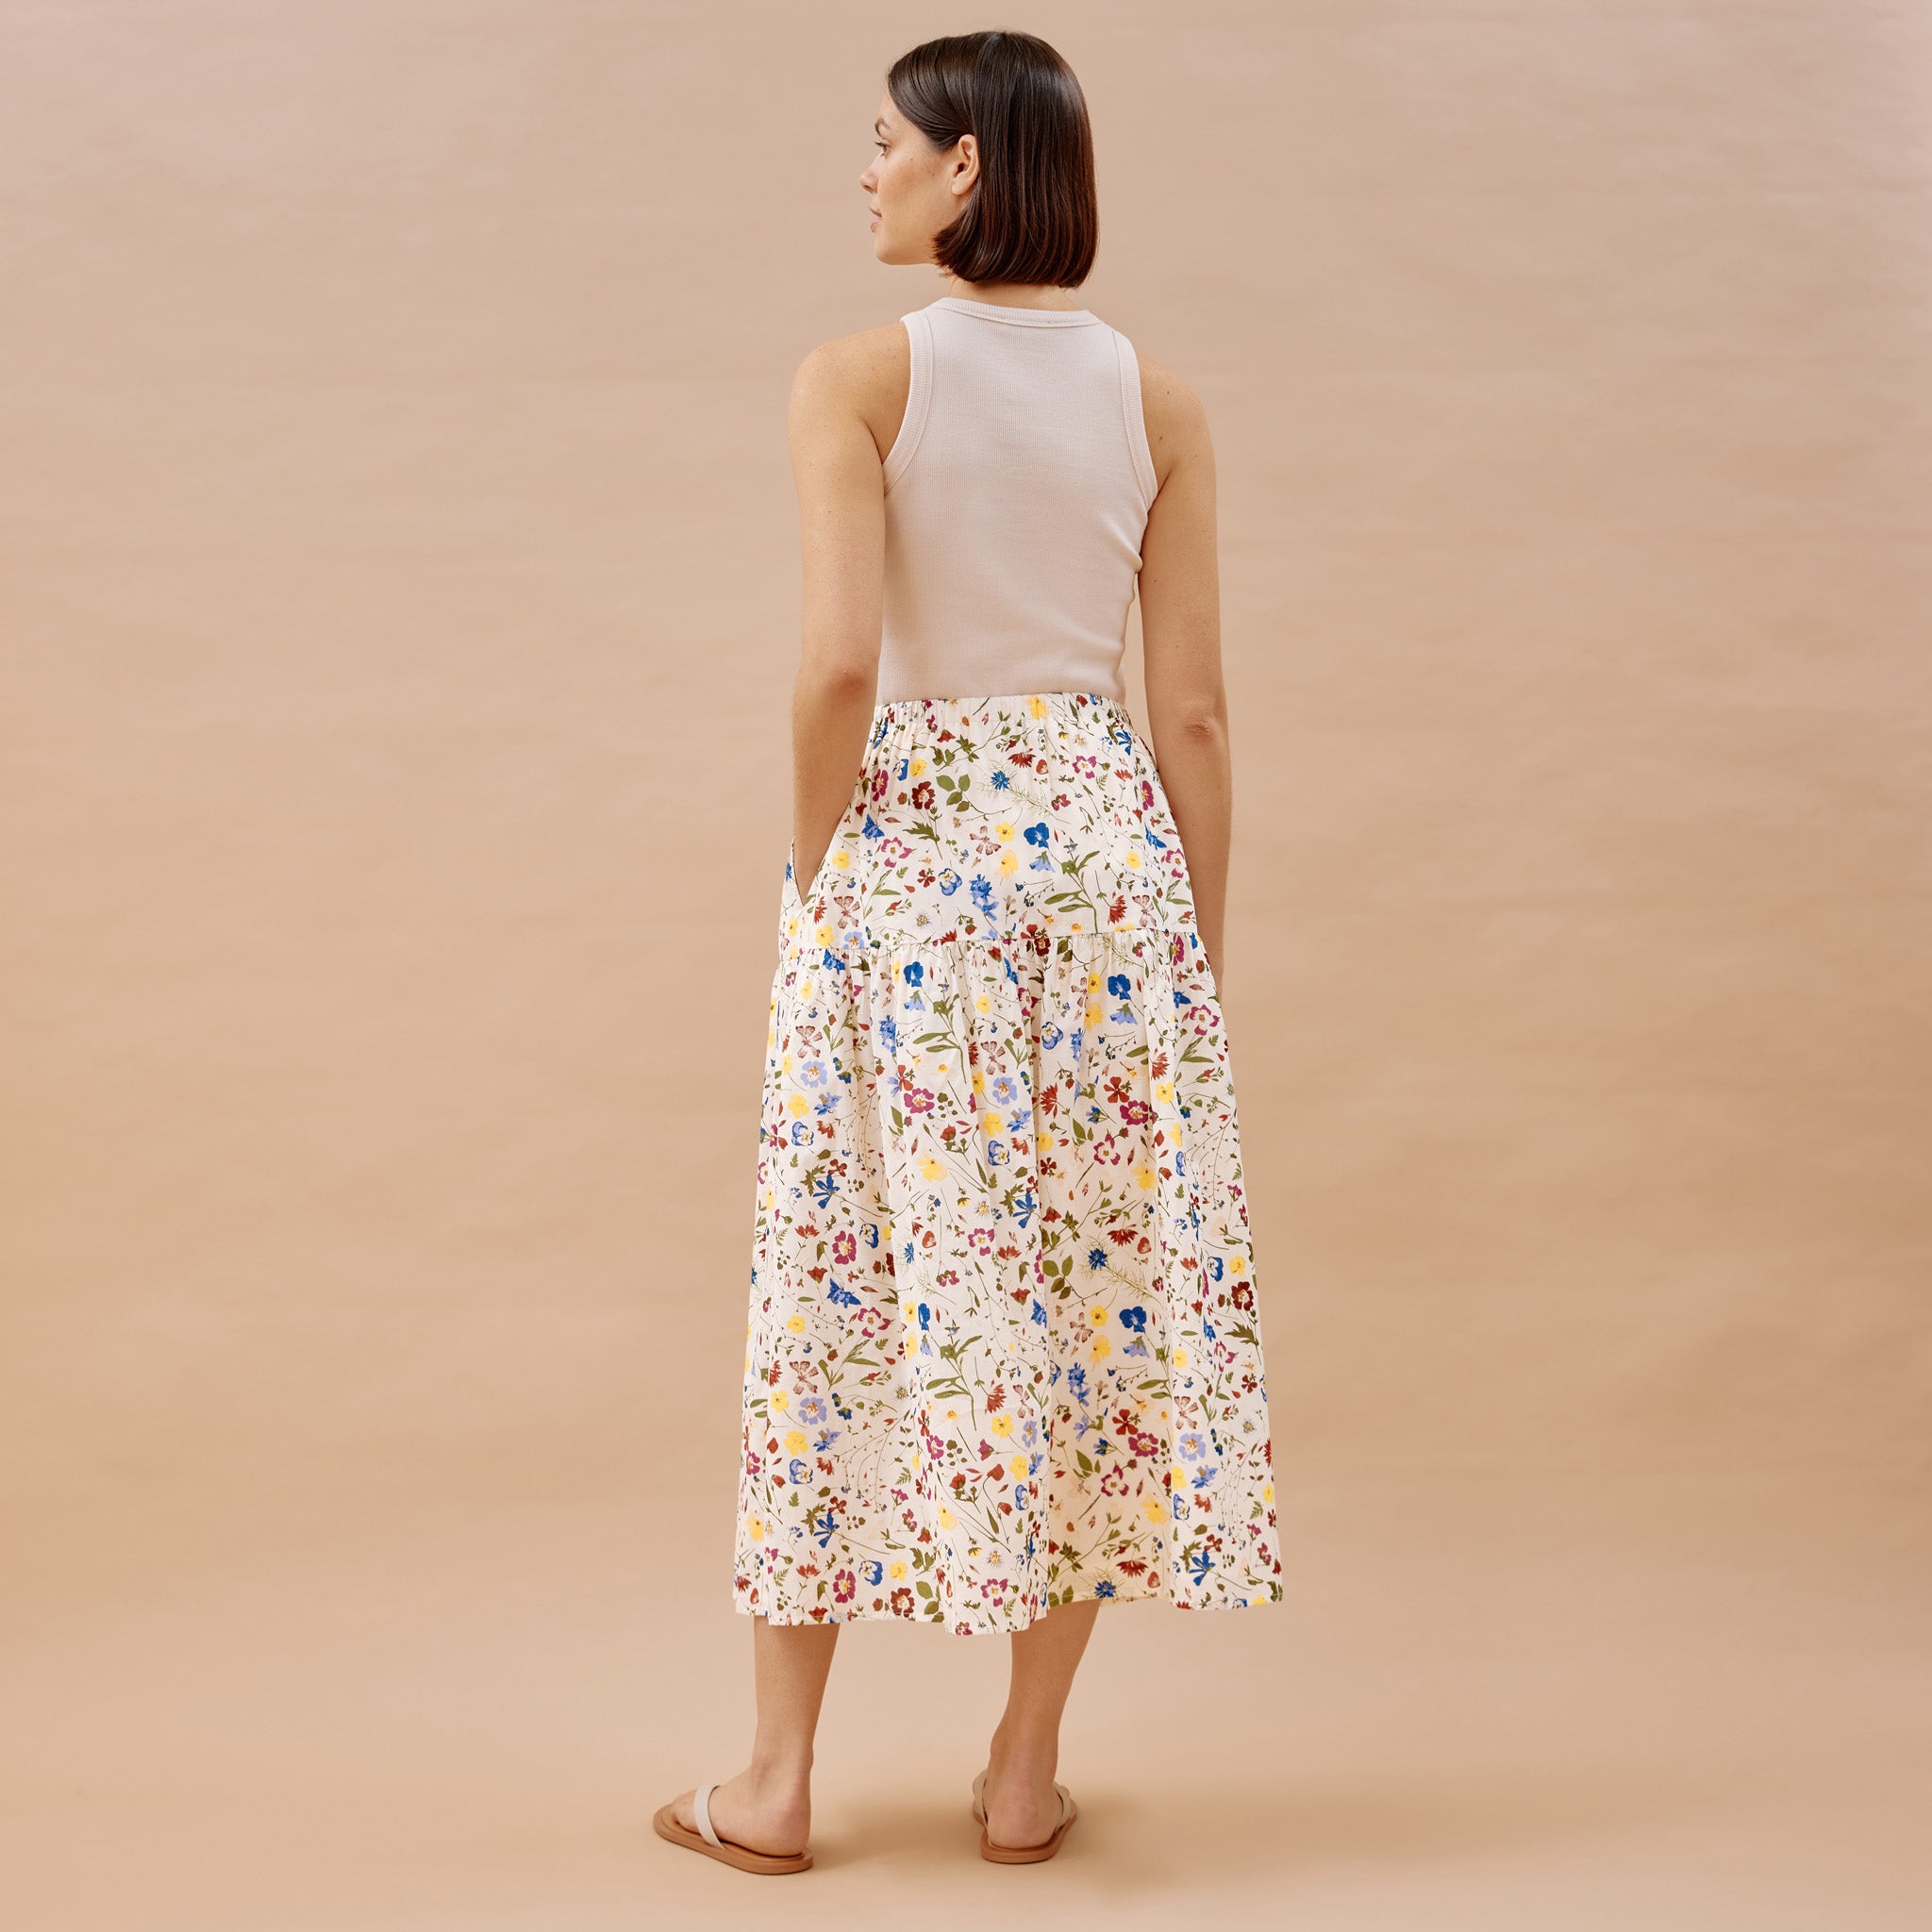 Buttercup Pressed Floral Skirt